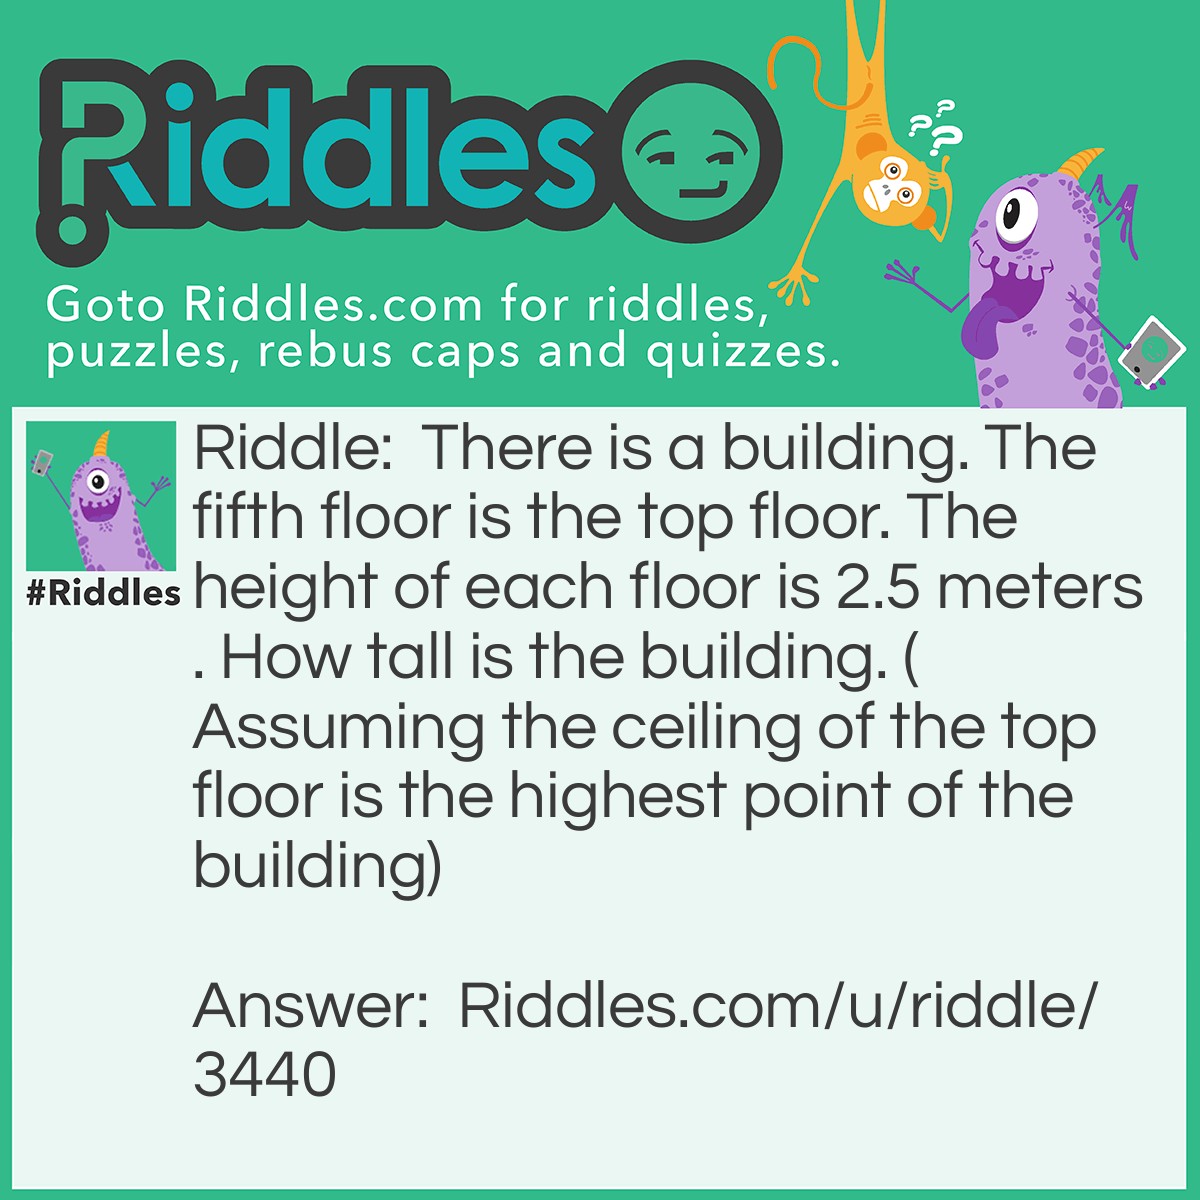 Riddle: There is a building. The fifth floor is the top floor. The height of each floor is 2.5 meters. How tall is the building. (Assuming the ceiling of the top floor is the highest point of the building) Answer: It depends. The first floor in UK is the second floor in US.